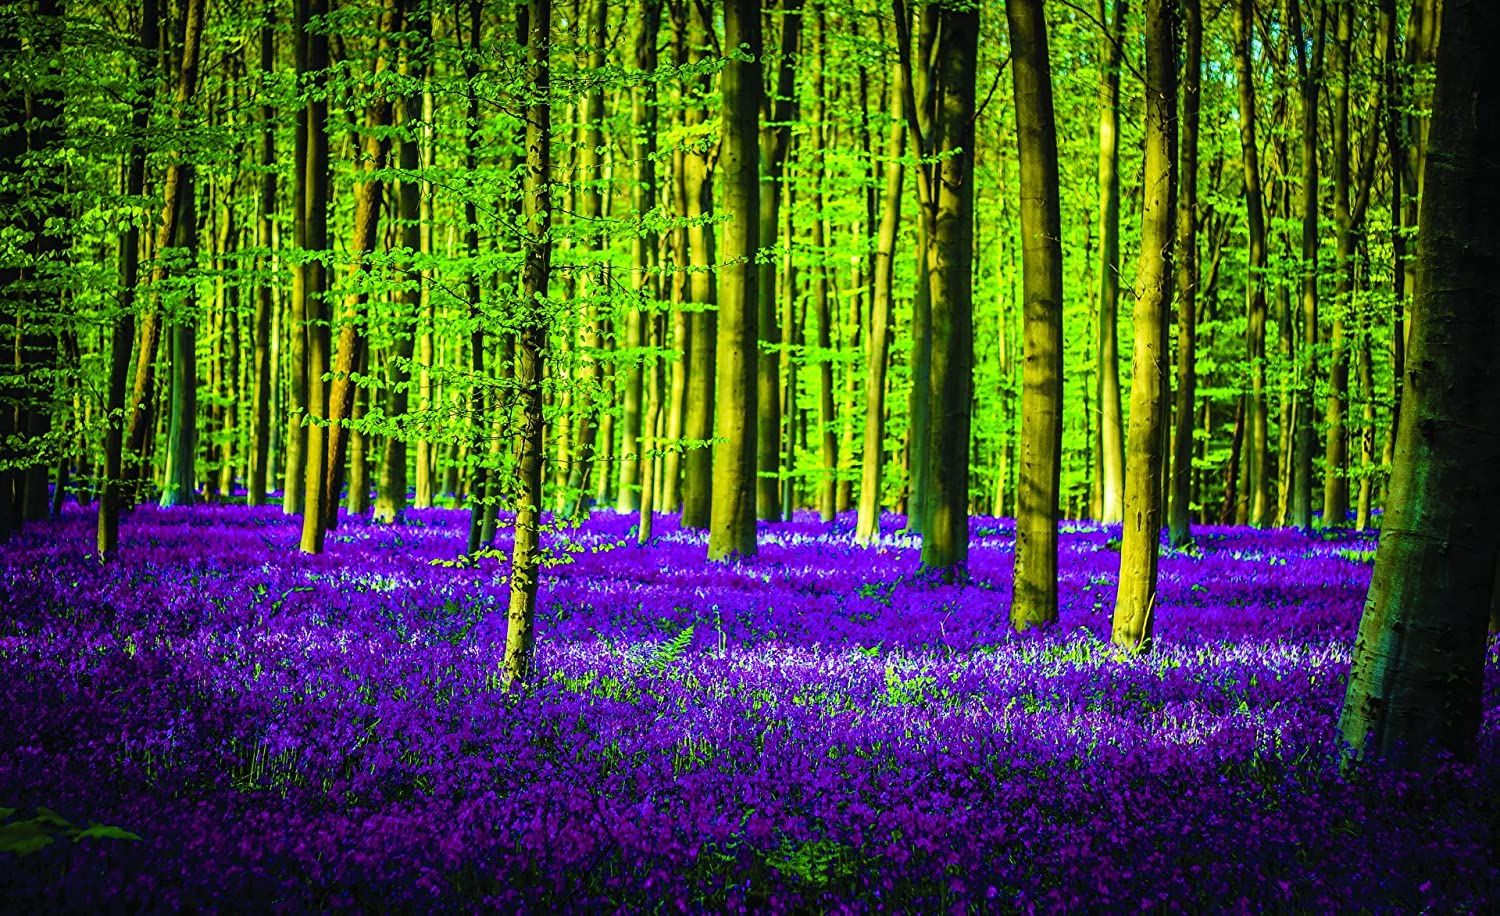 Spring Forest Wood with Bluebells Wallpaper Mural